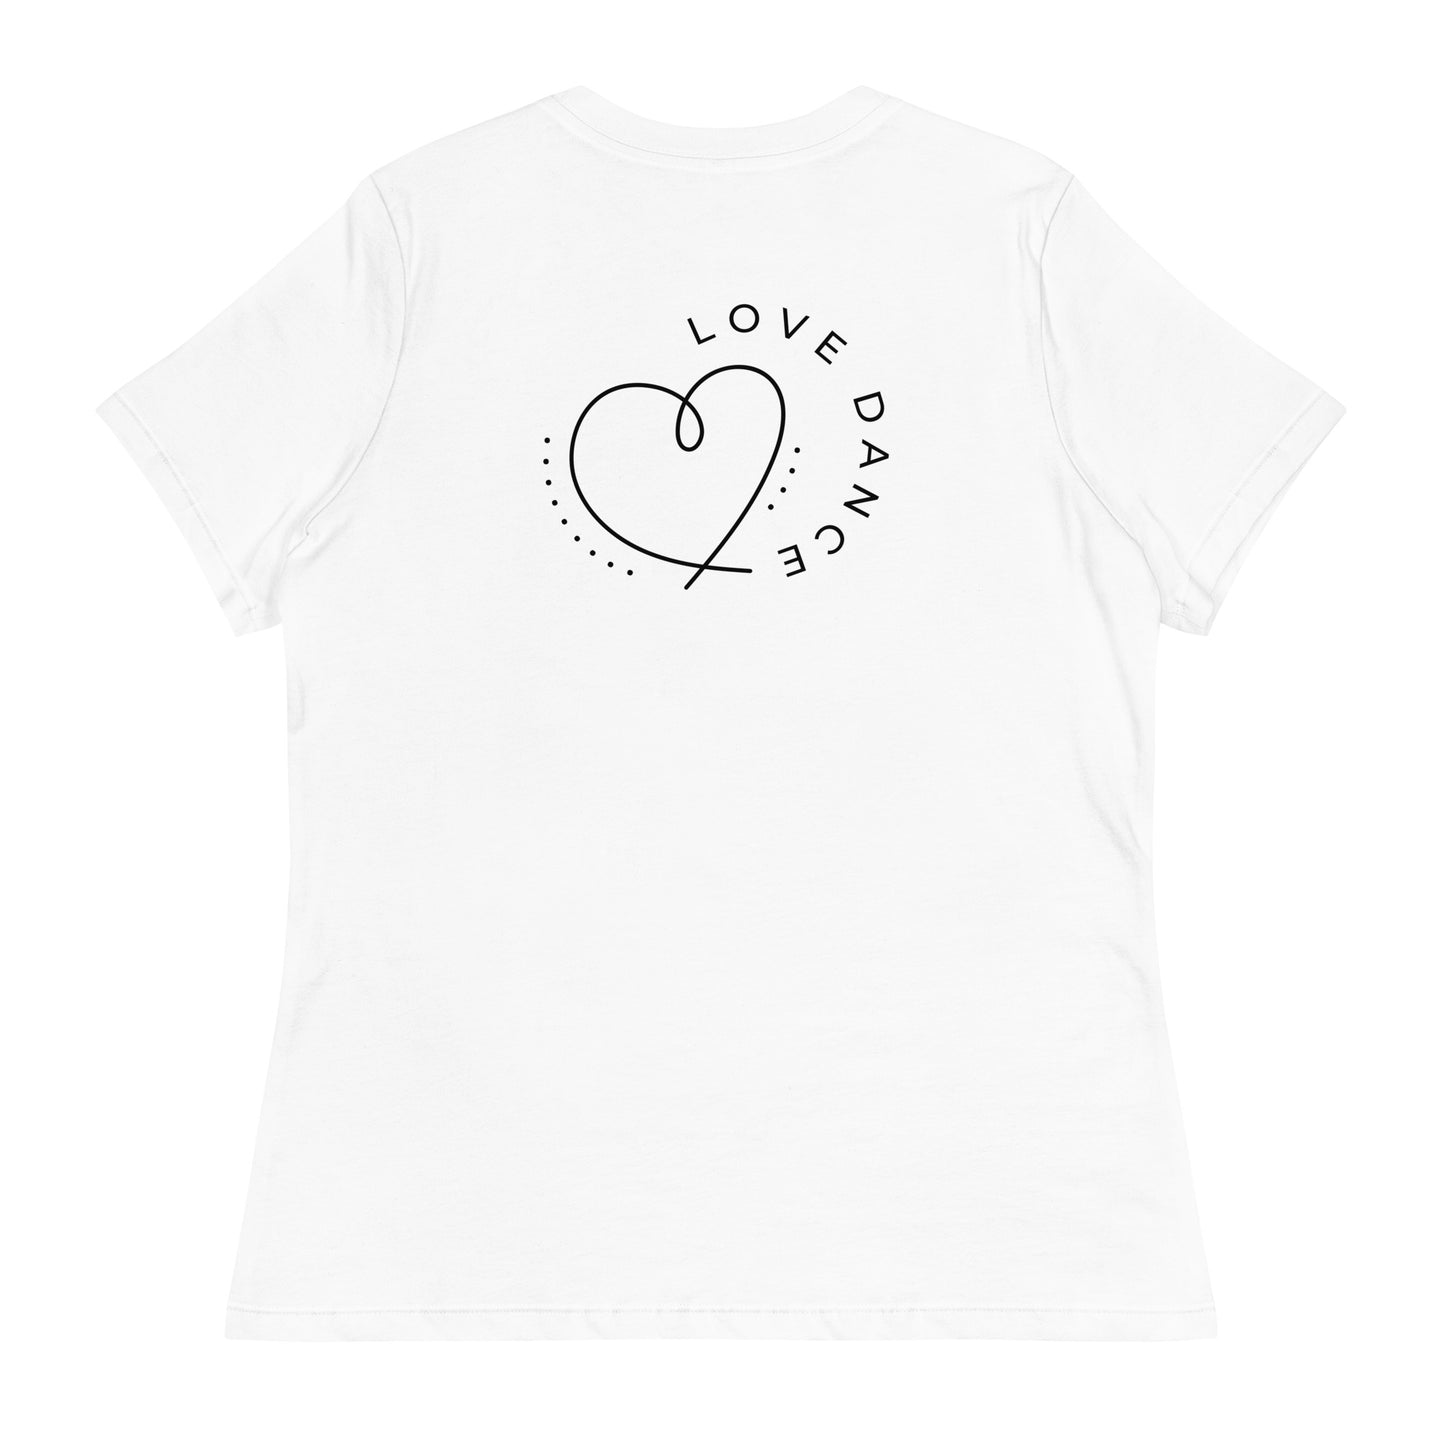 Ladies Relaxed T-Shirt Minimalist Heart